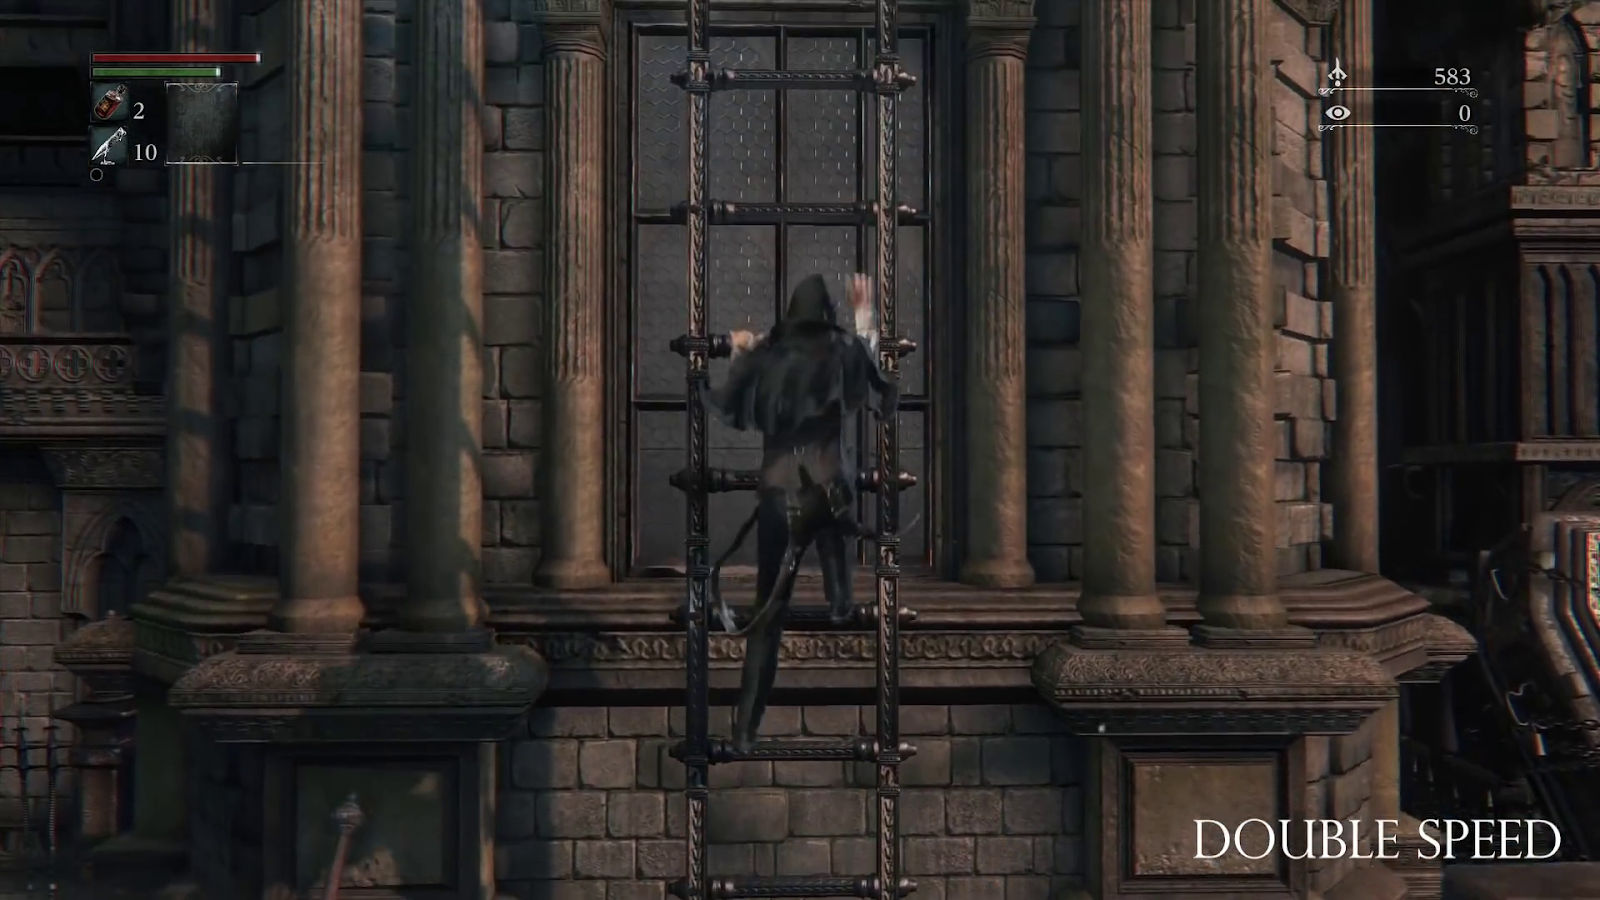 Bloodborne is the only From Software game locked to 30FPS. It's time to  change that.